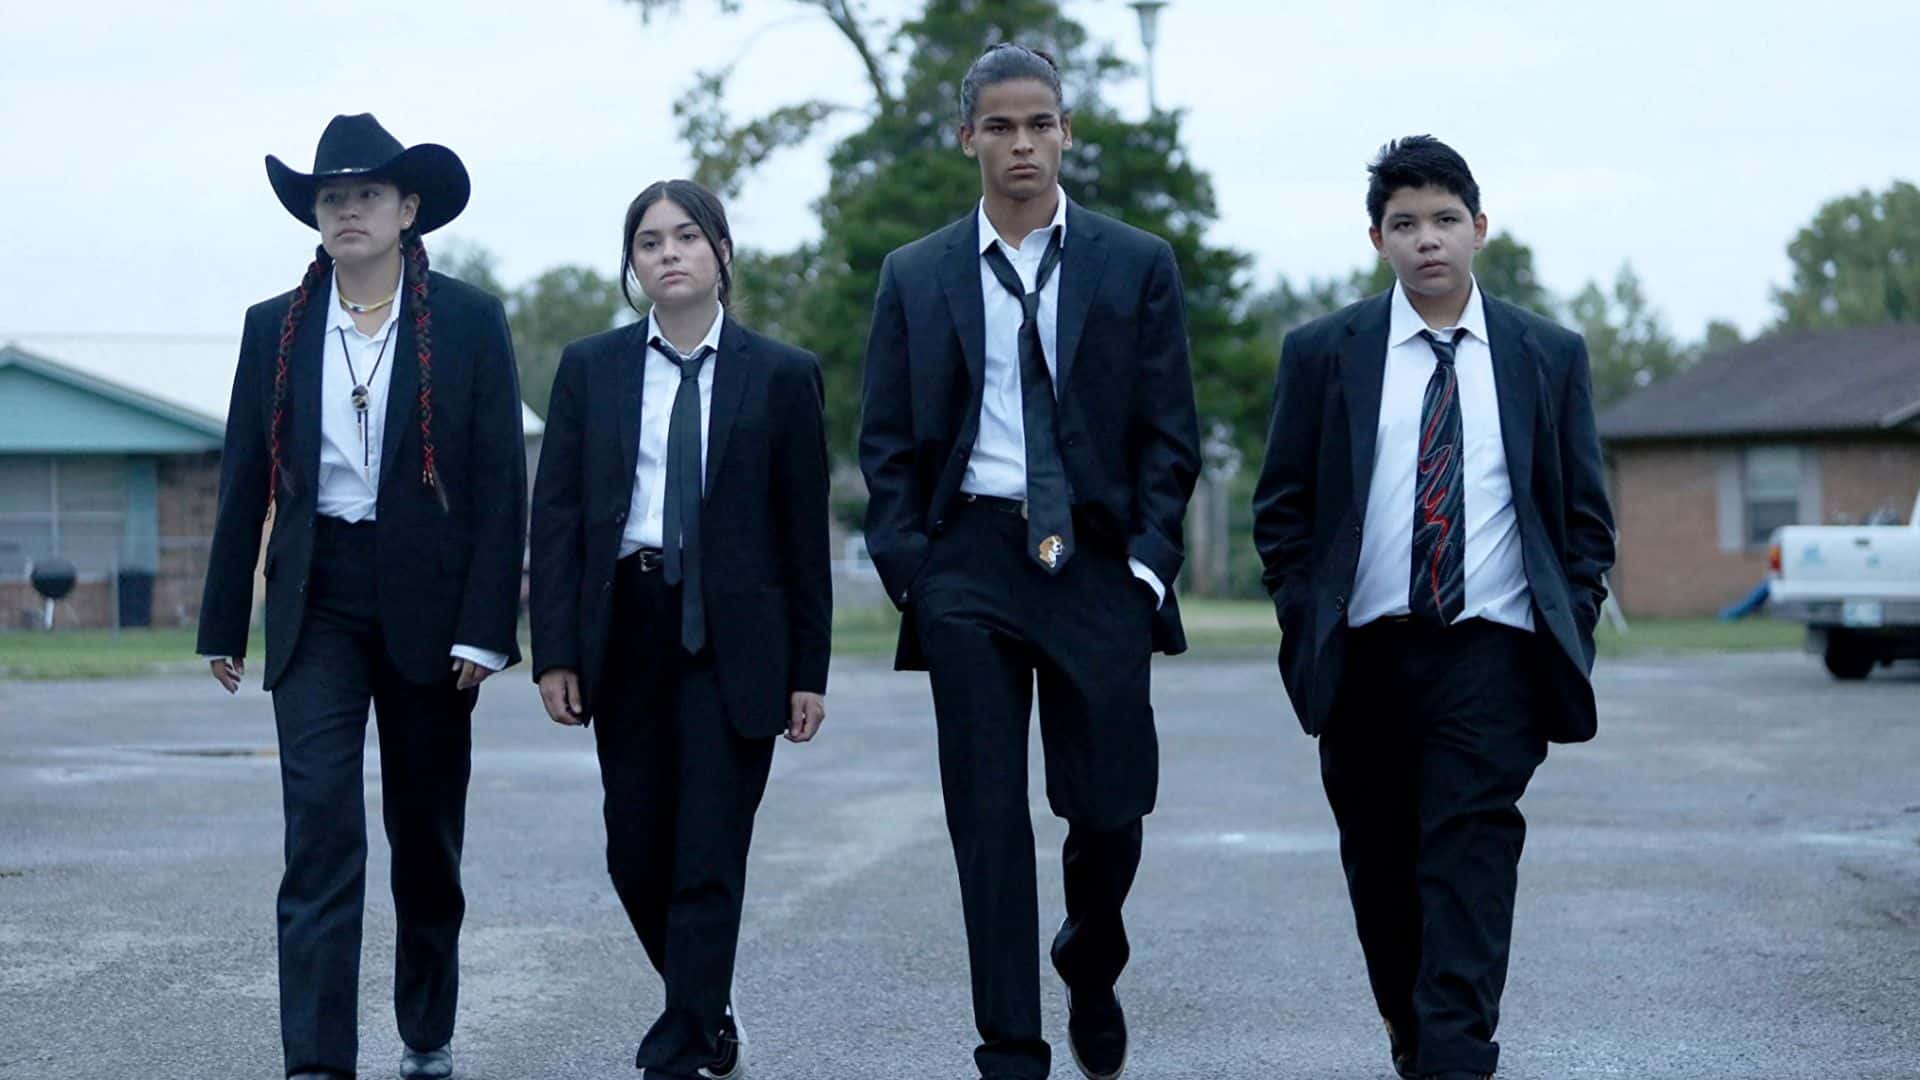 Paulina Alexis, Devery Jacobs, D'Pharaoh Woon-A-Tai, and Lane Factor dressed in black suits and ties in this image from FXP